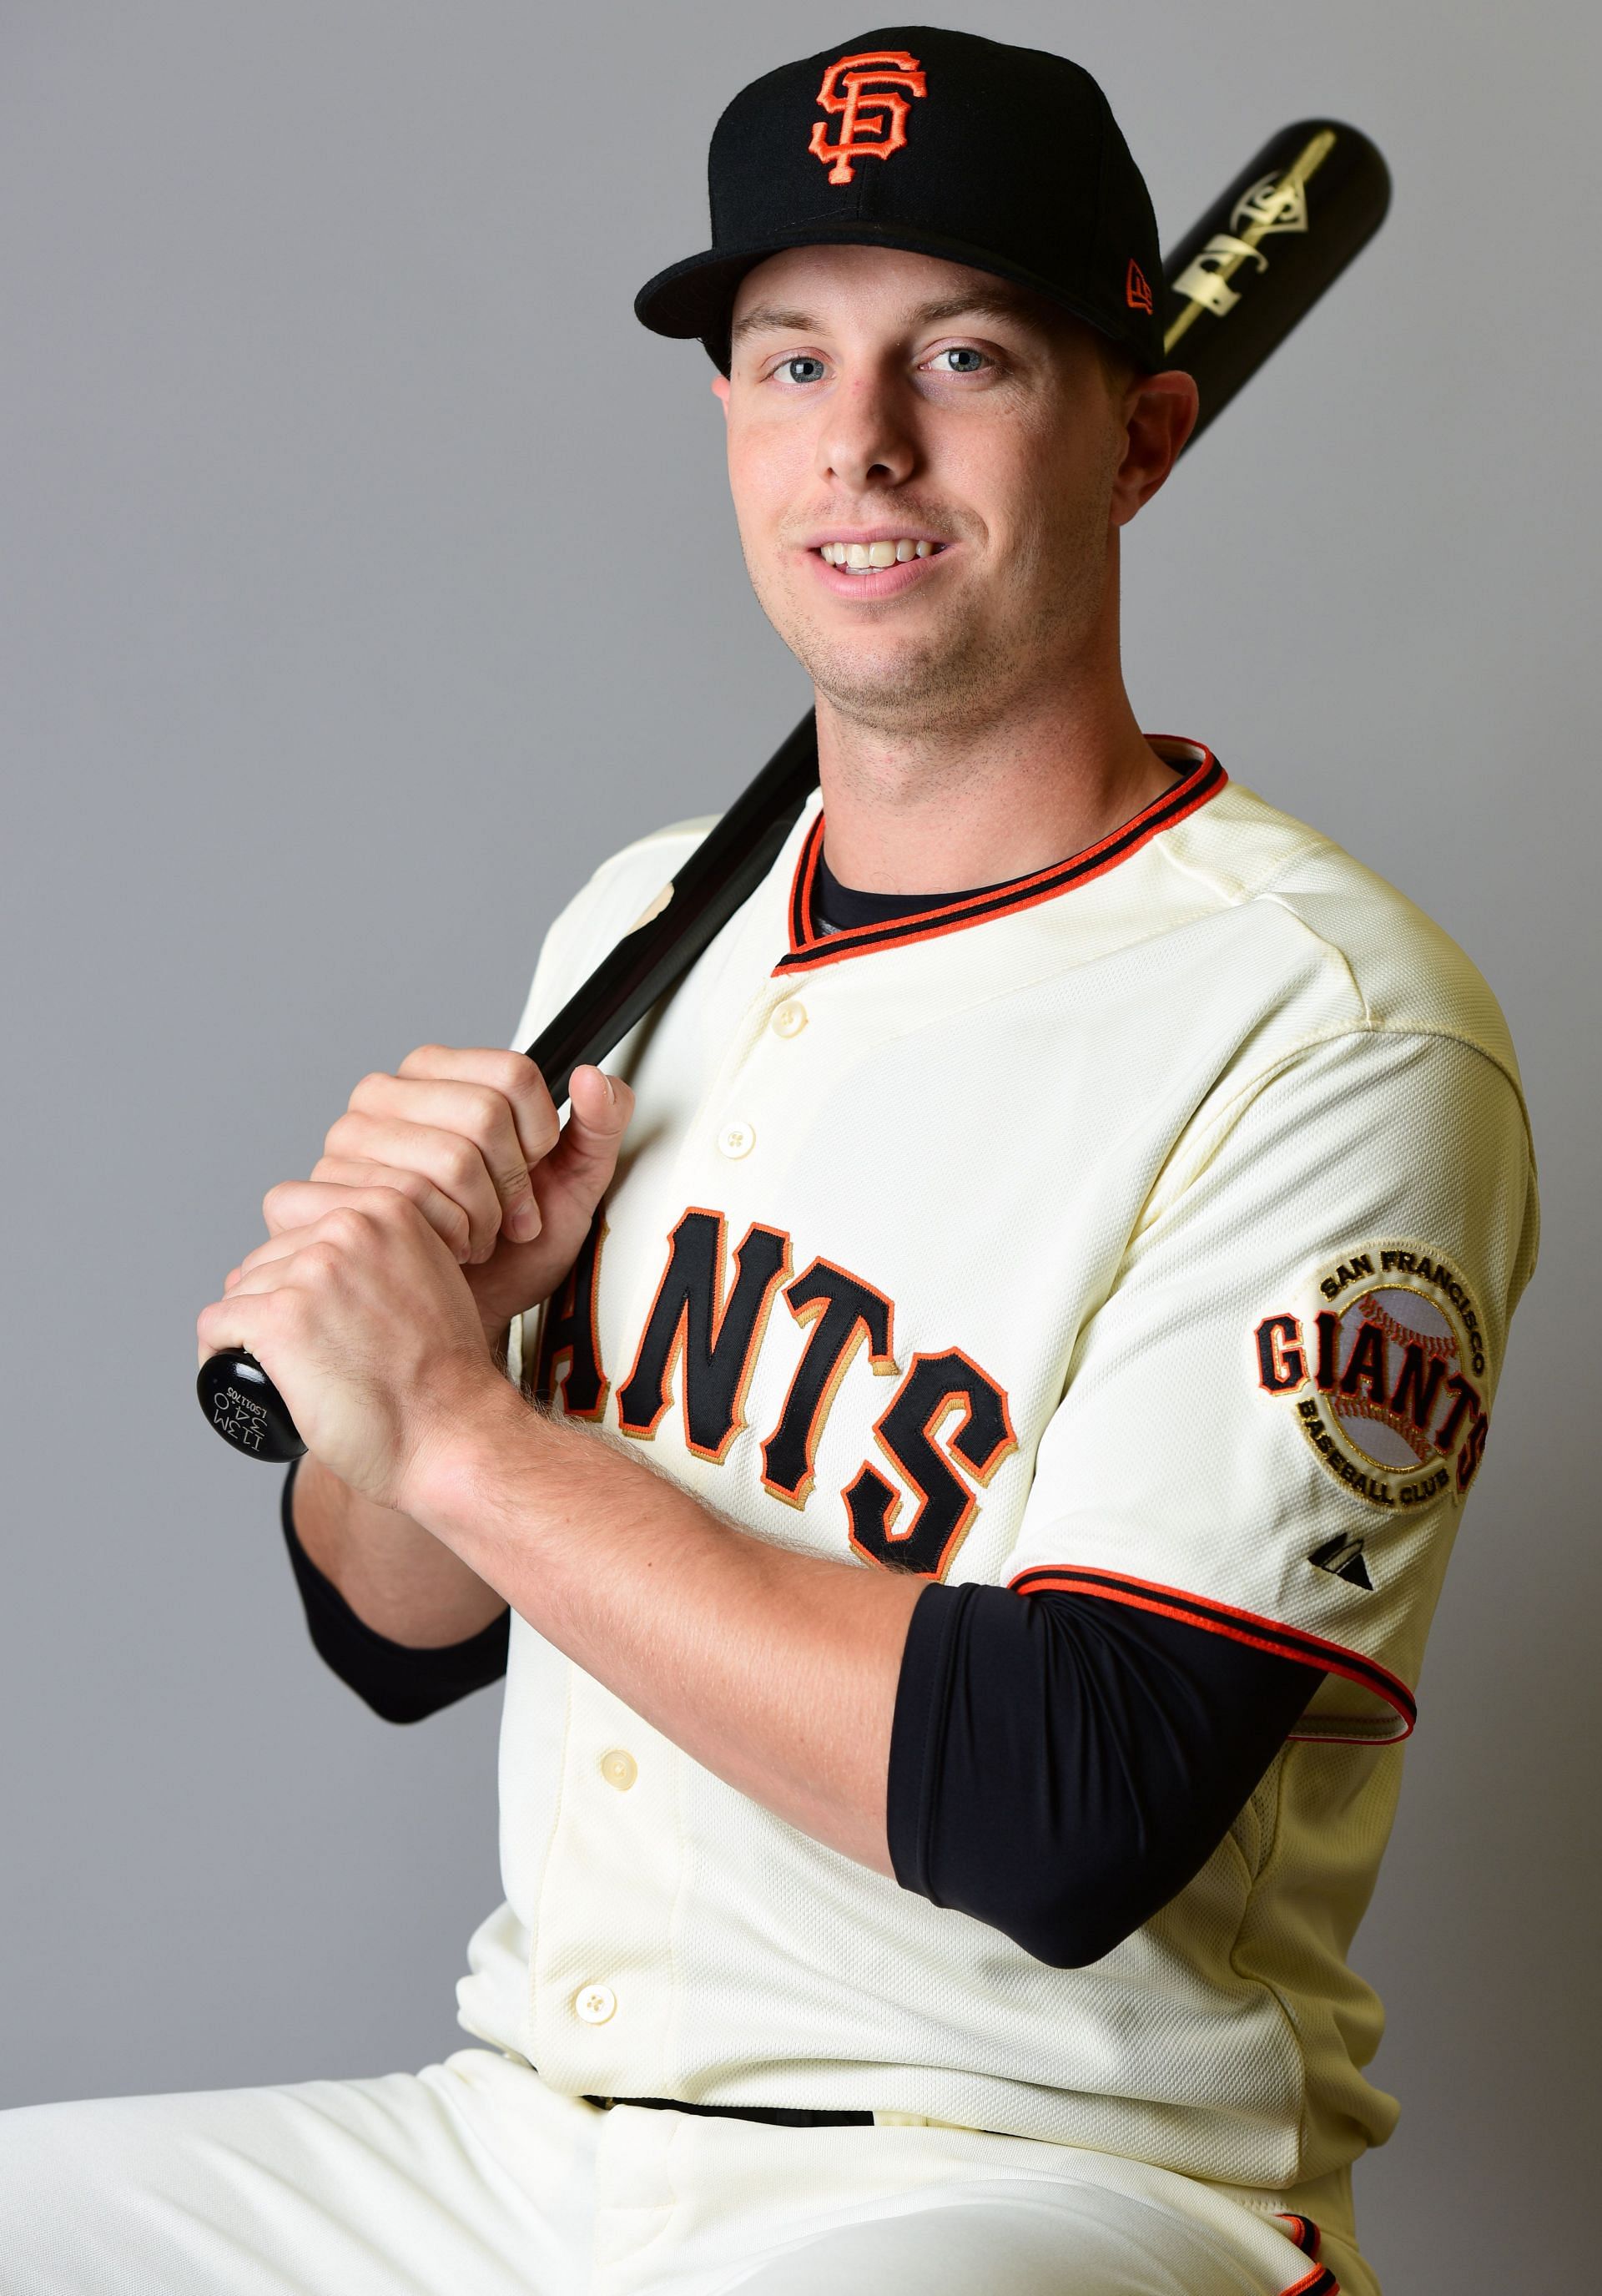 Infielder J.D. Davis grateful to play in the Bay Area: It's a dream come  true as a Northern California kid to wear that Giants jersey